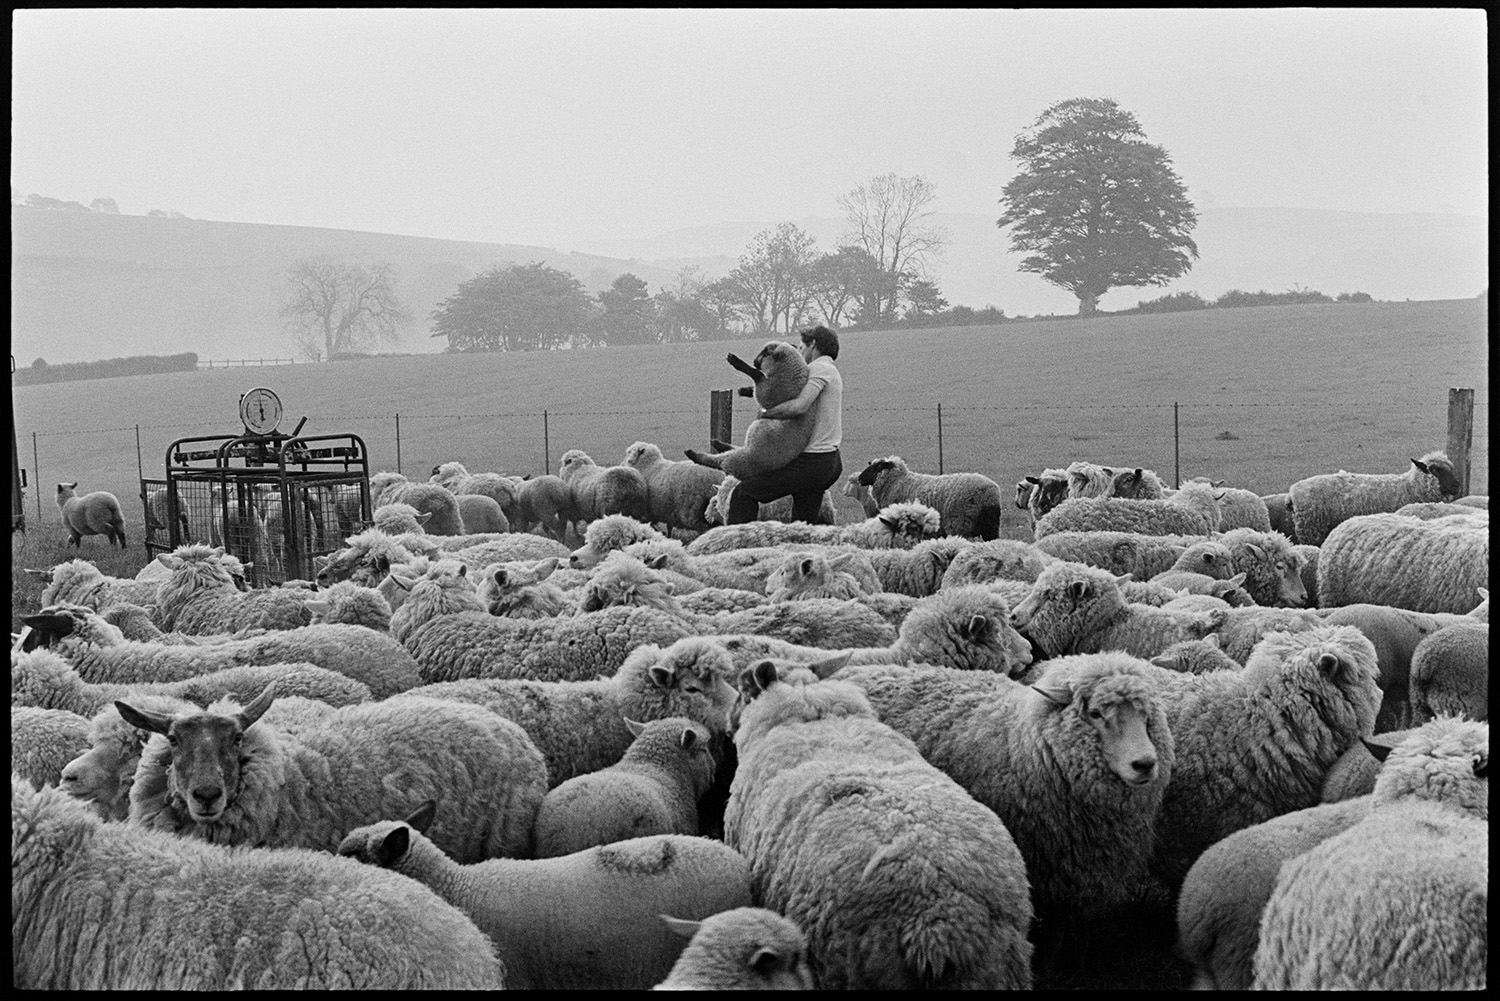 Farmers taking flock of sheep through village to be weighed and sorted. 
[Mr Cole picking up a sheep from a flock and taking it to a weighing machine in a field at Densham, Ashreigney.]